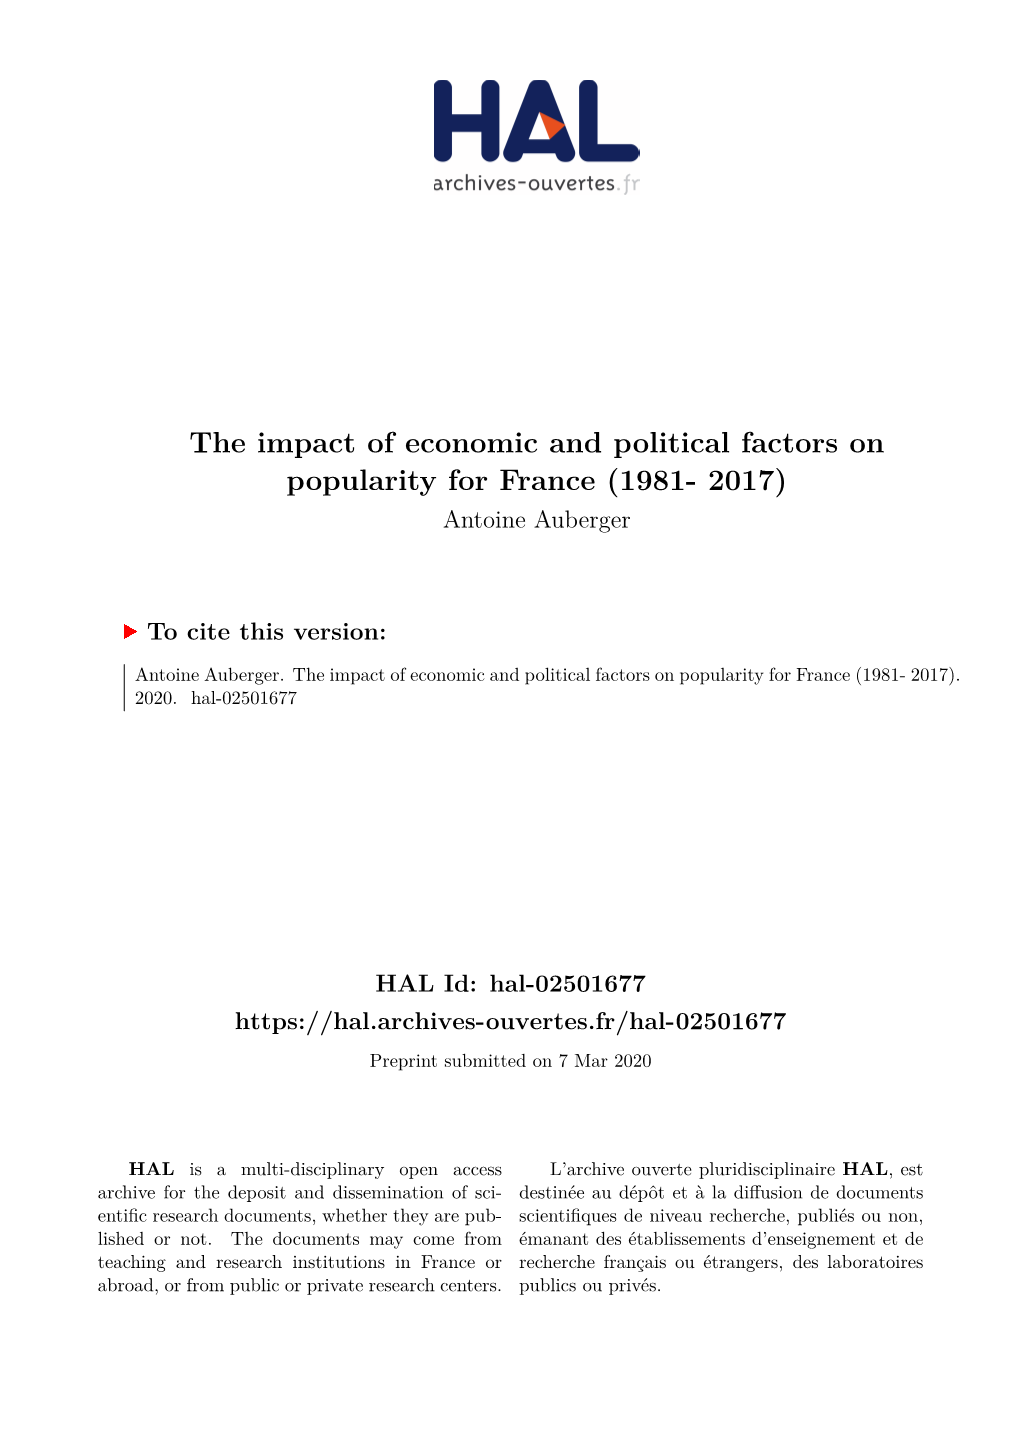 The Impact of Economic and Political Factors on Popularity for France (1981- 2017) Antoine Auberger